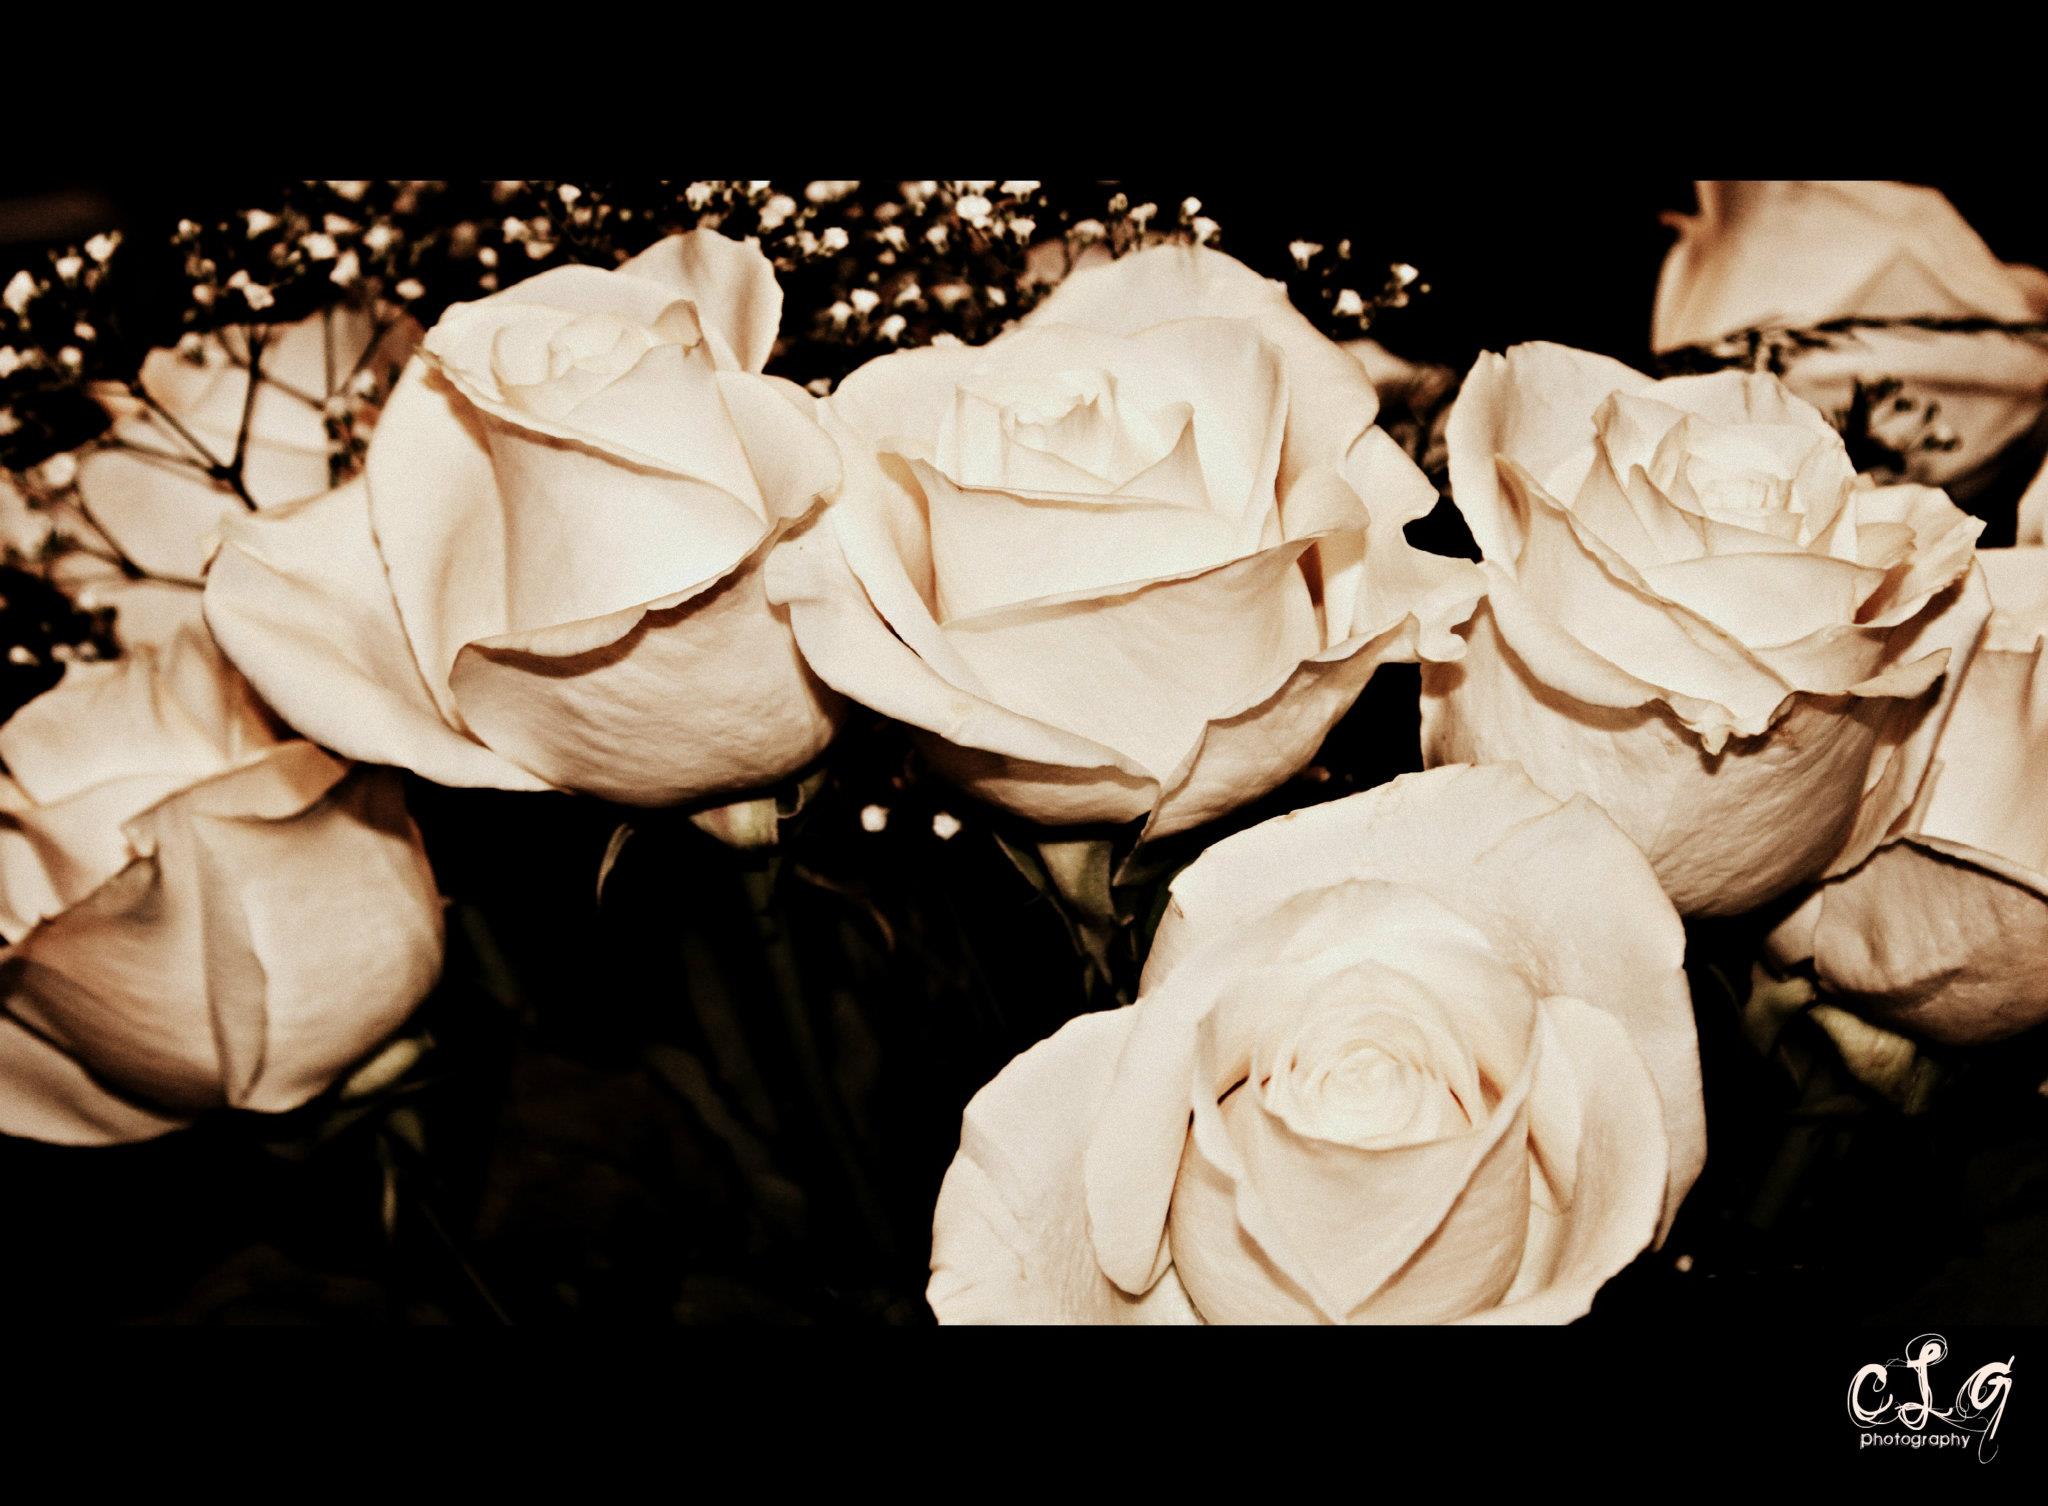 My photography - White roses